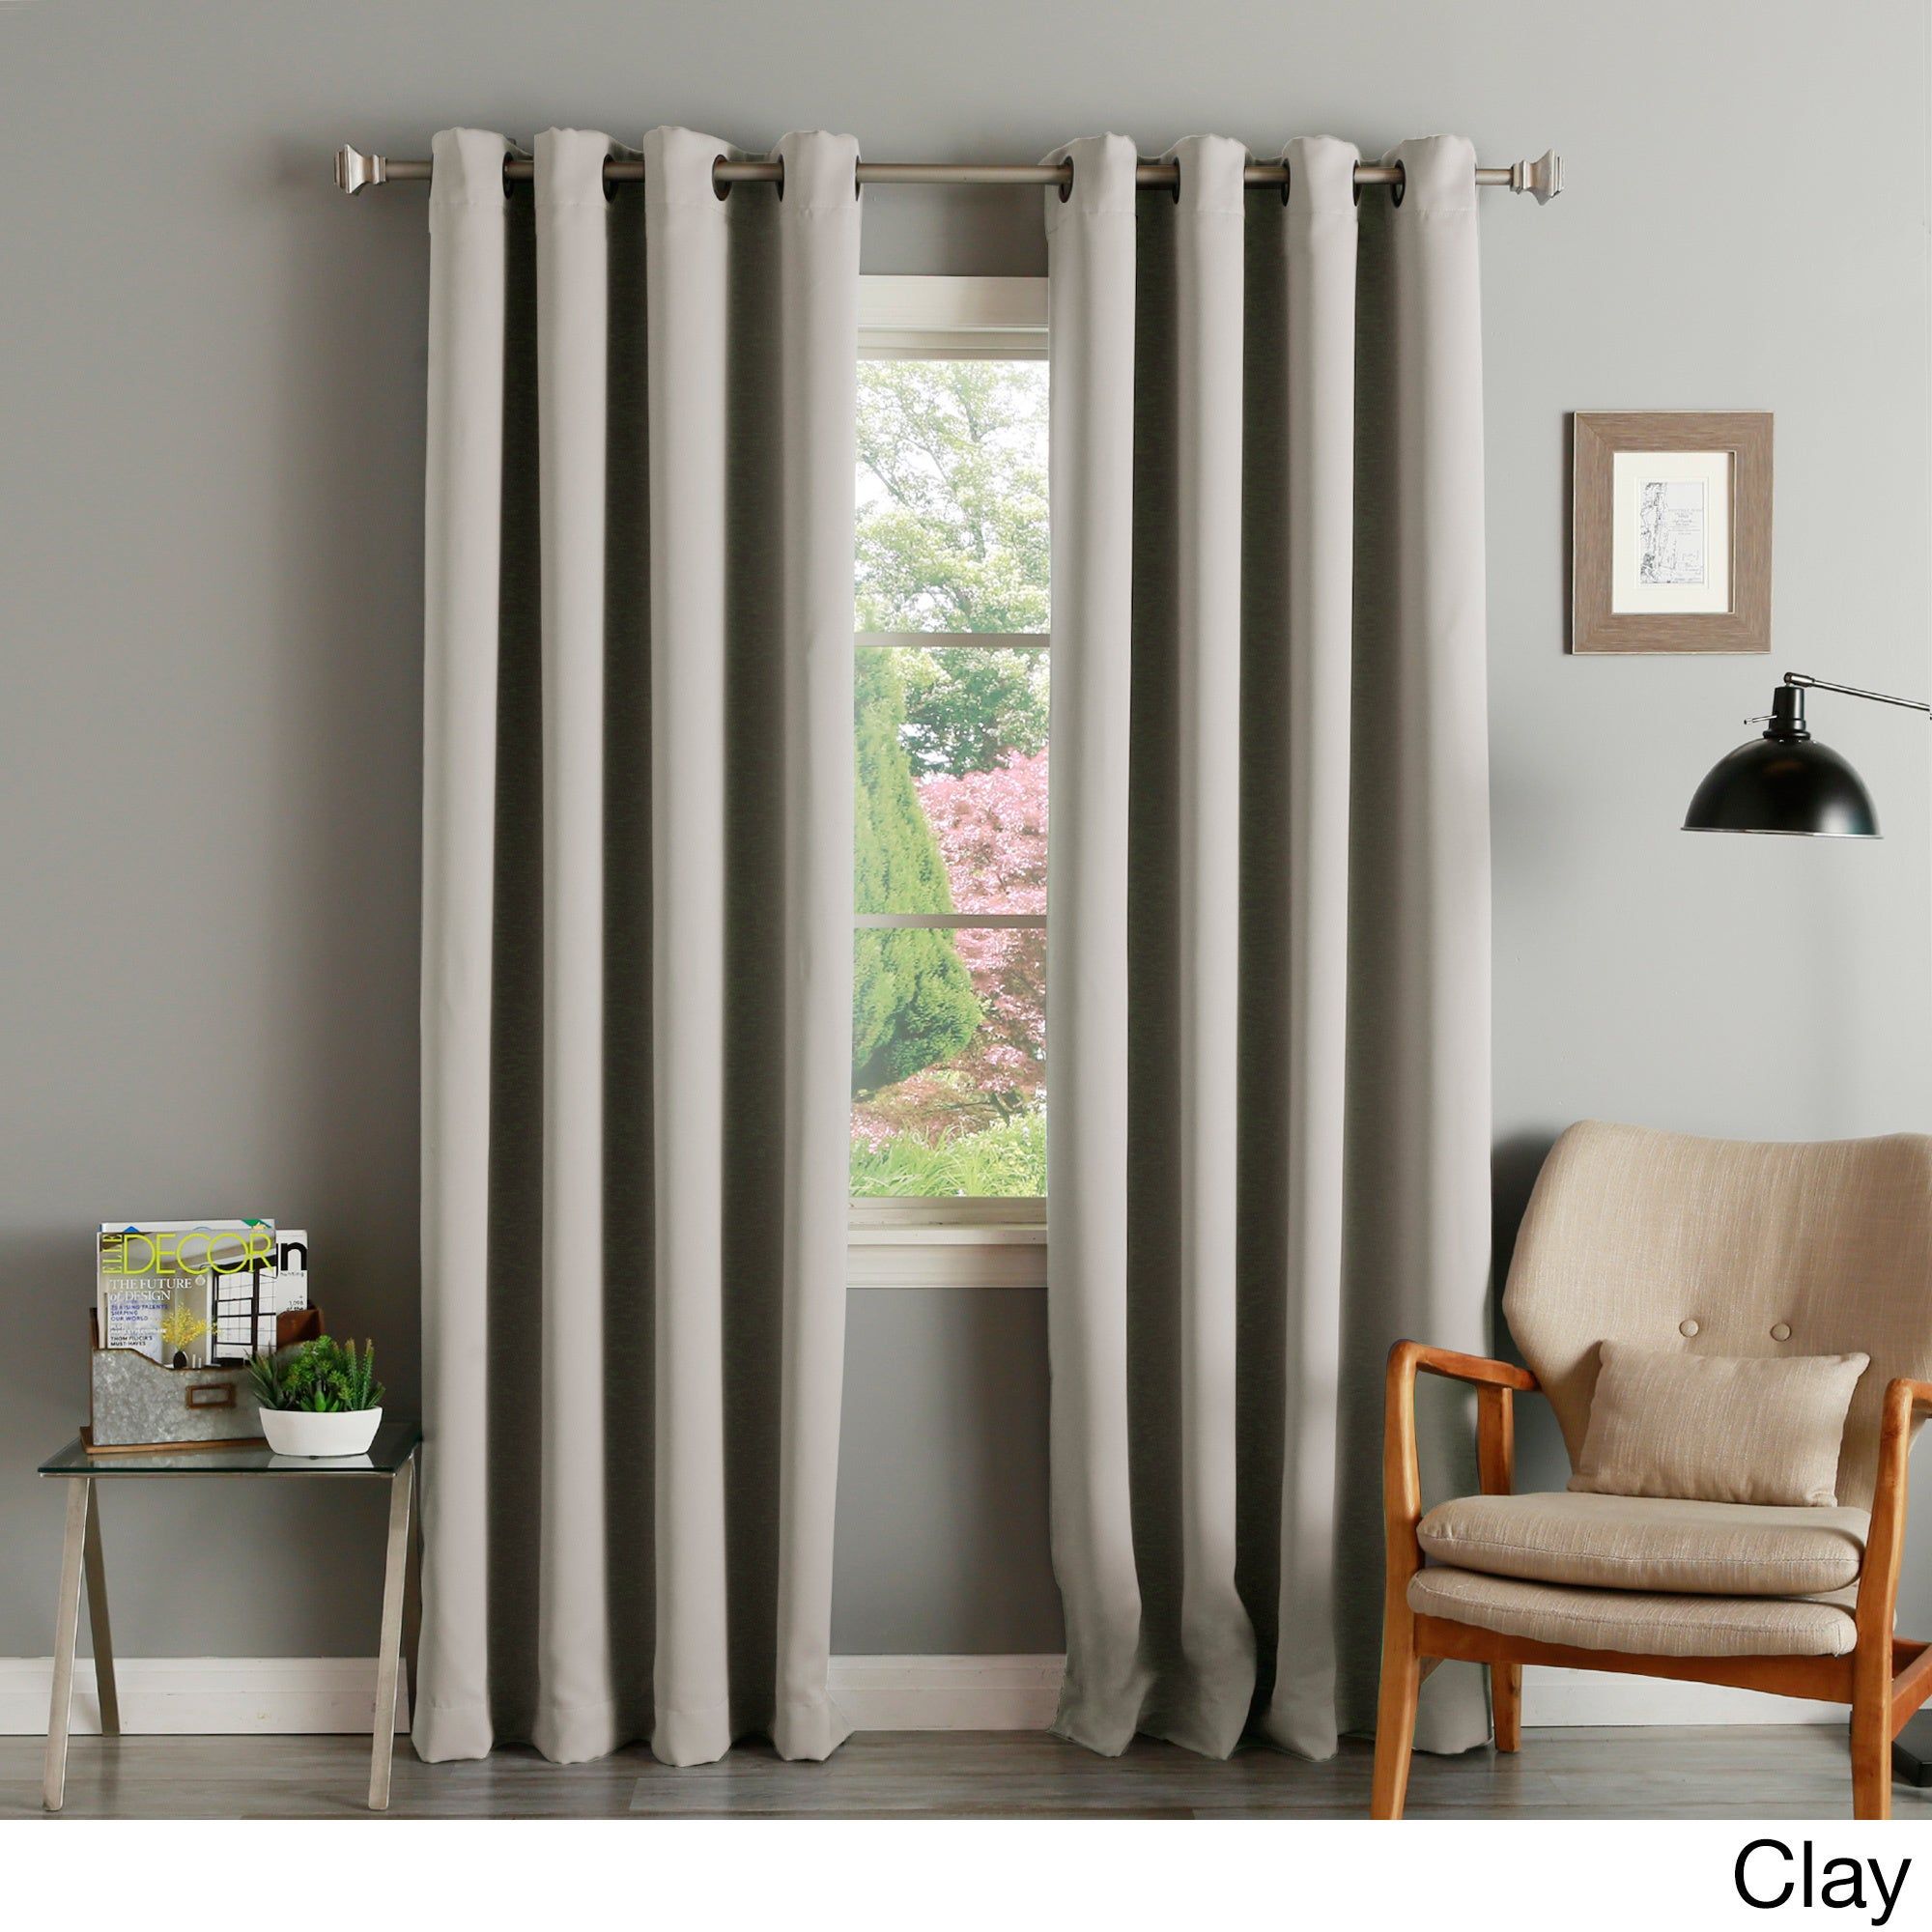 Aurora Home Thermal Insulated Blackout Grommet Top Curtain Panel Pair Throughout Thermal Insulated Blackout Curtain Panel Pairs (View 1 of 30)